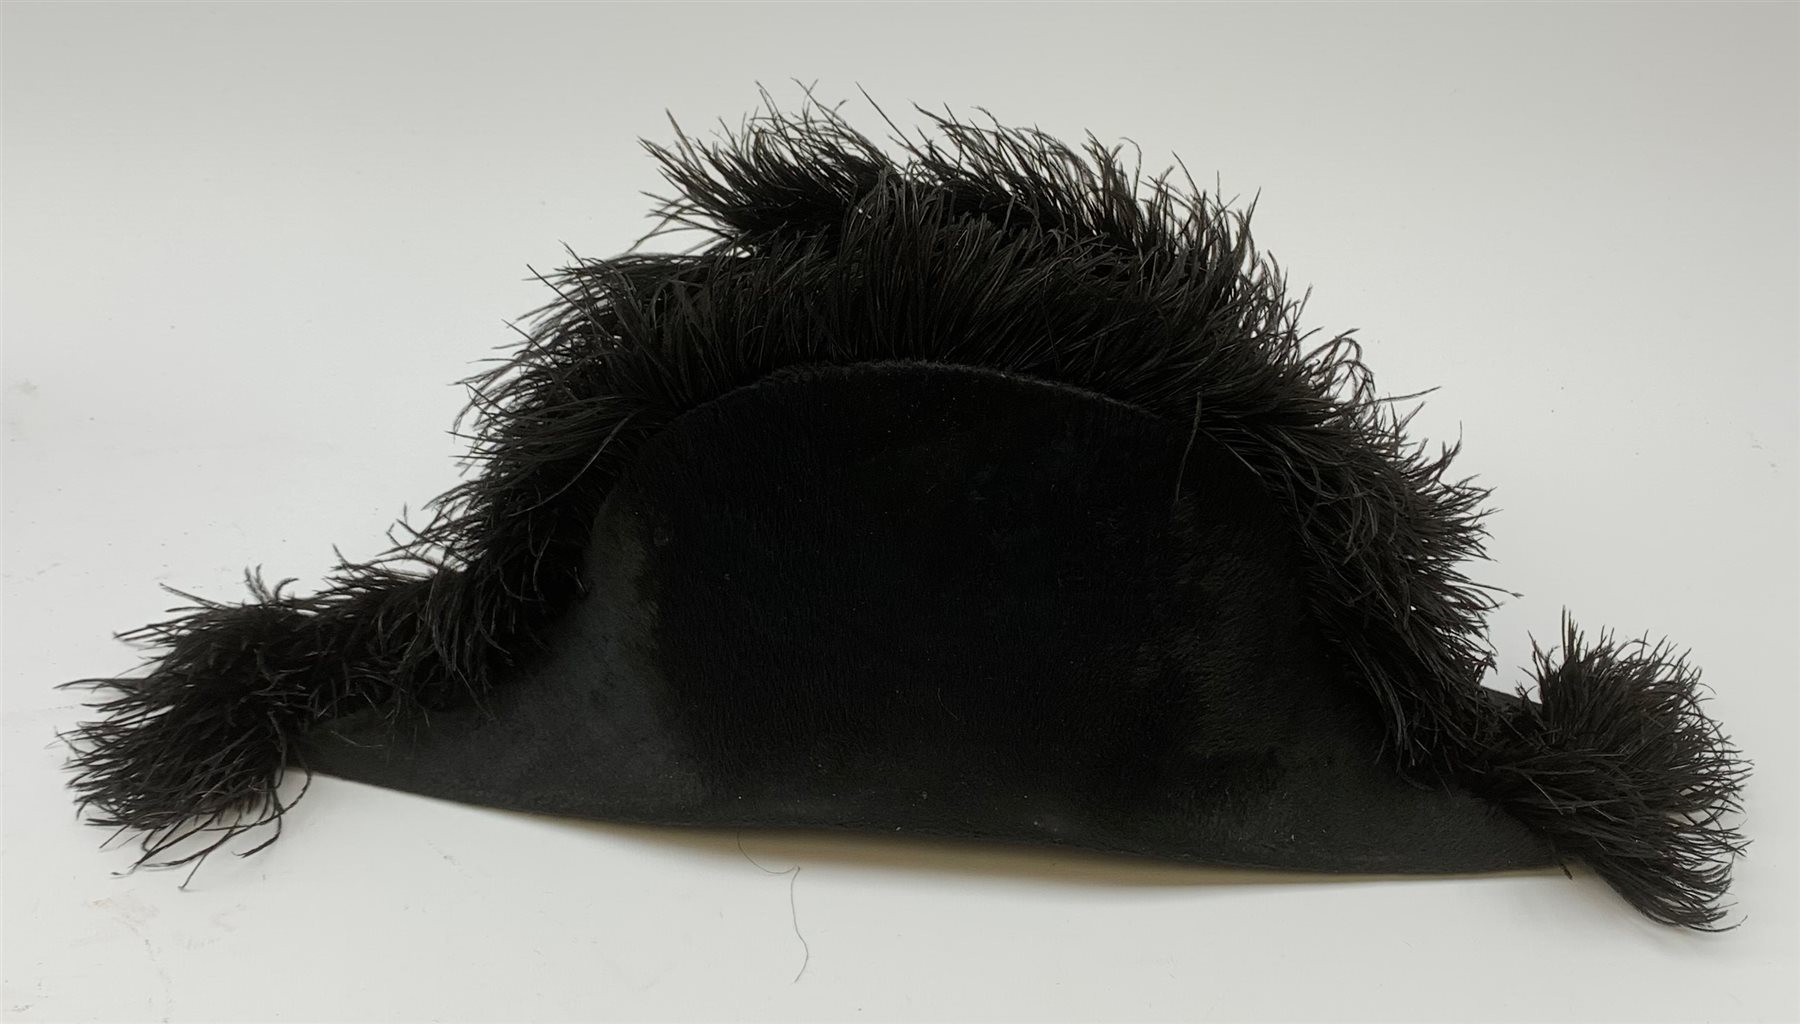 19th century cocked hat, probably French Naval officers, with black moleskin finish and ostrich feat - Image 4 of 7